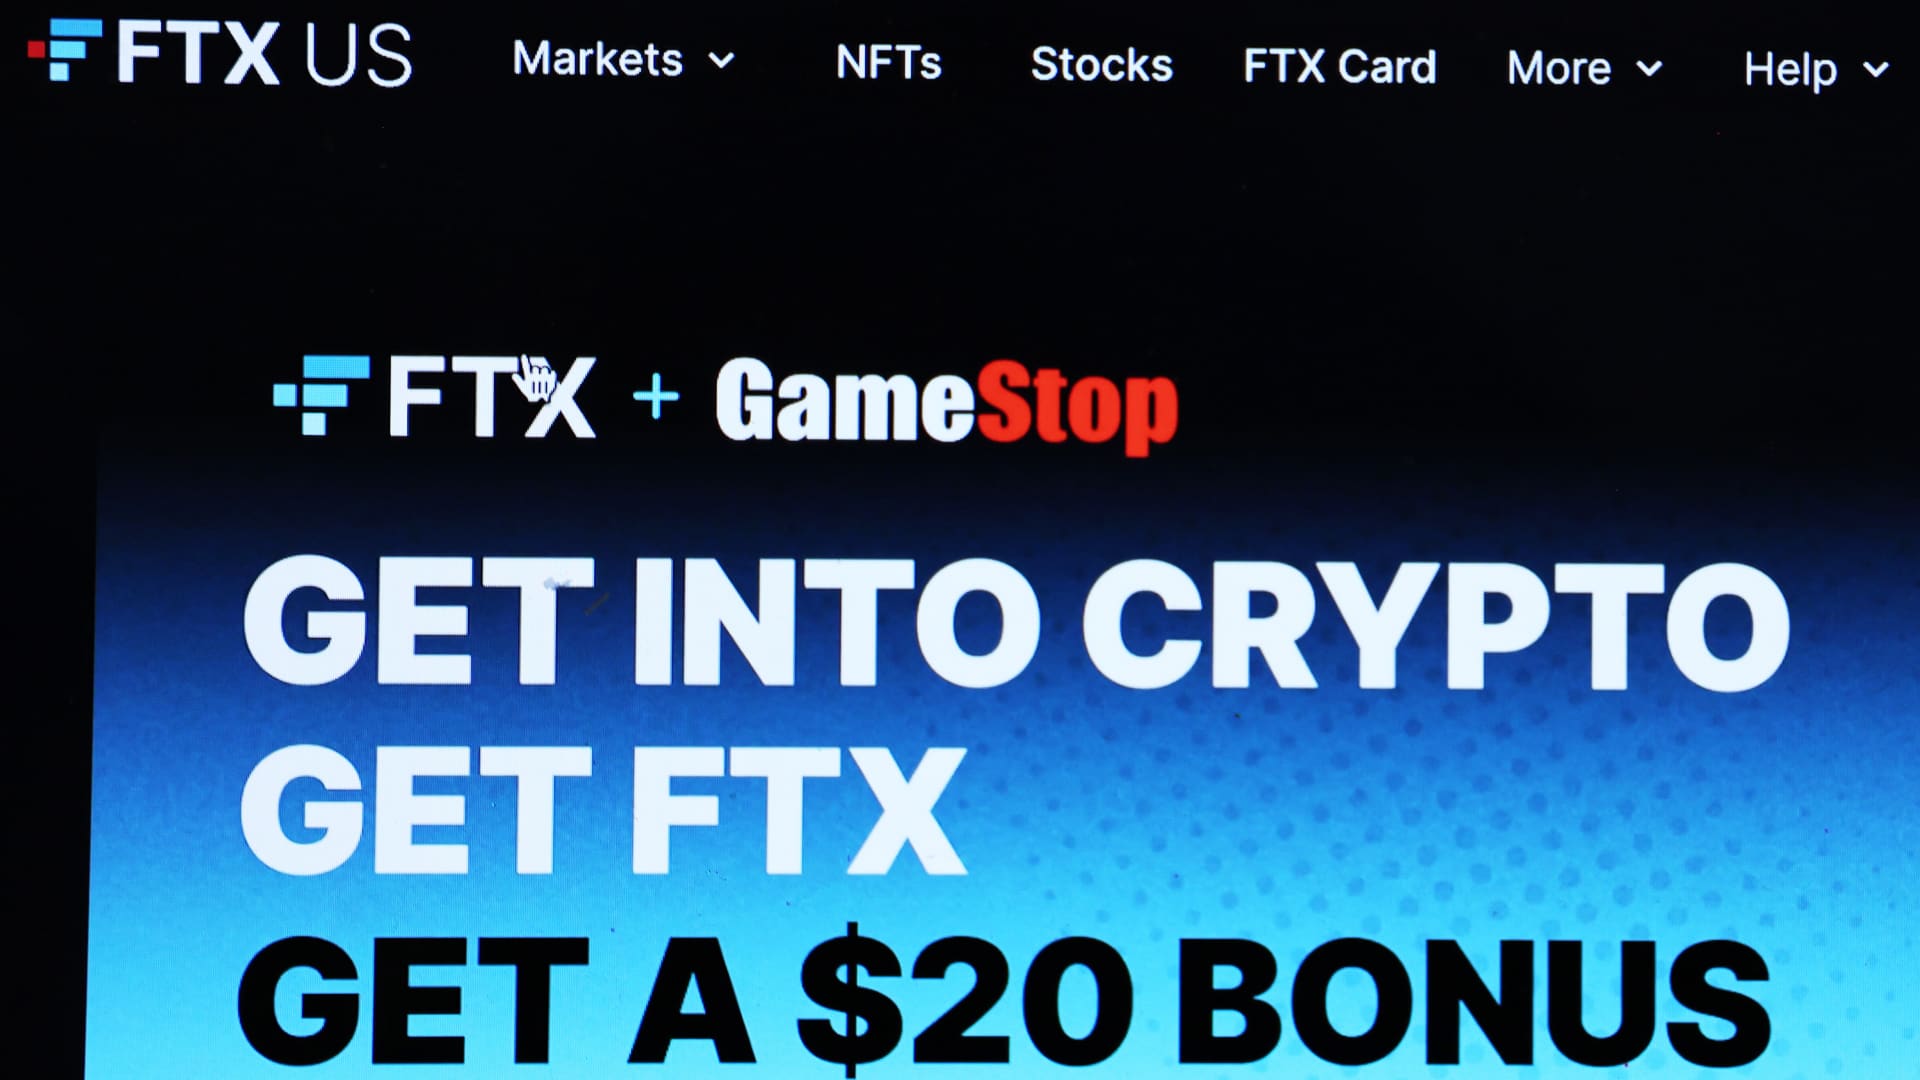 FTX says it's removing trading and withdrawals, moving digital assets to a cold wallet after a 7 million suspected hack